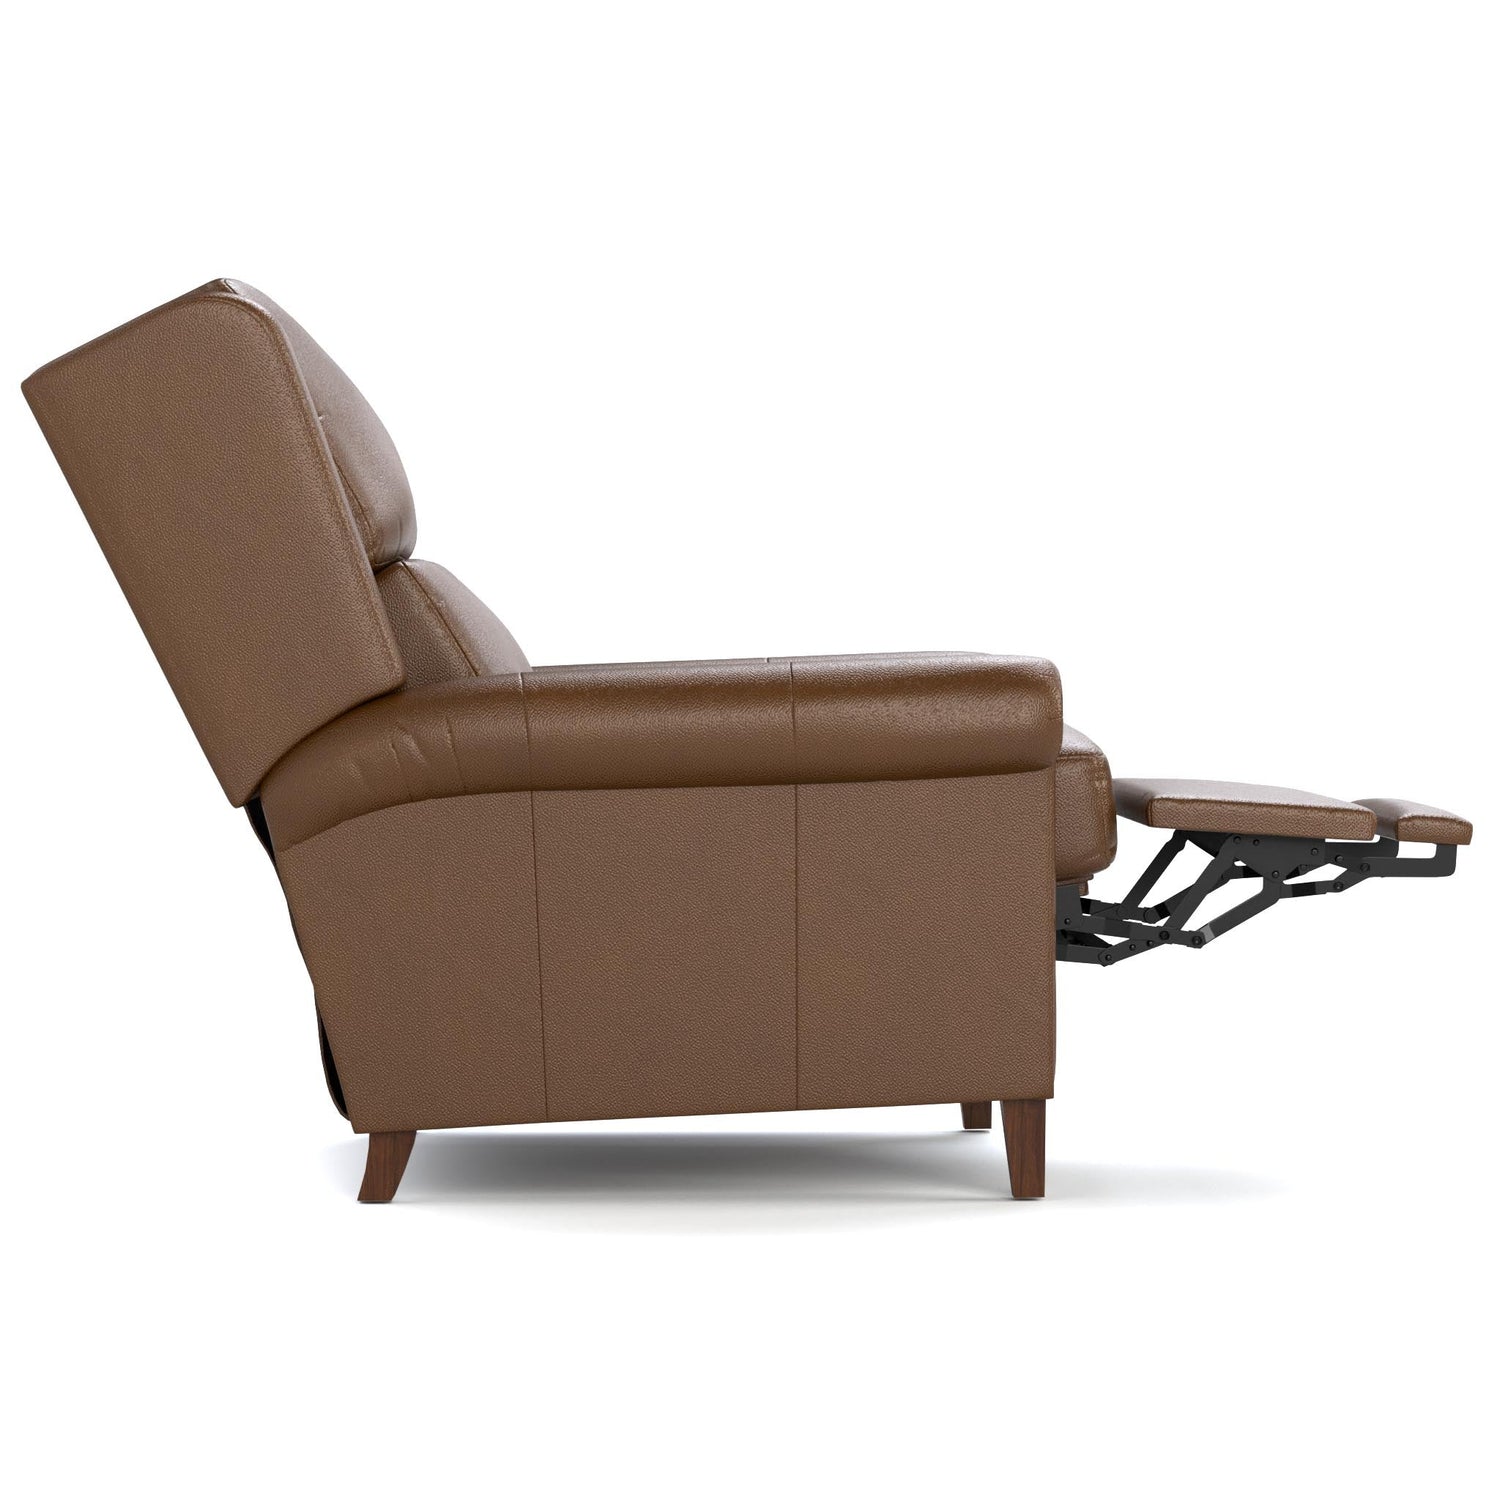 Woodlands Small Roll Arm Power Recliner Selvano Bark - Side Reclined